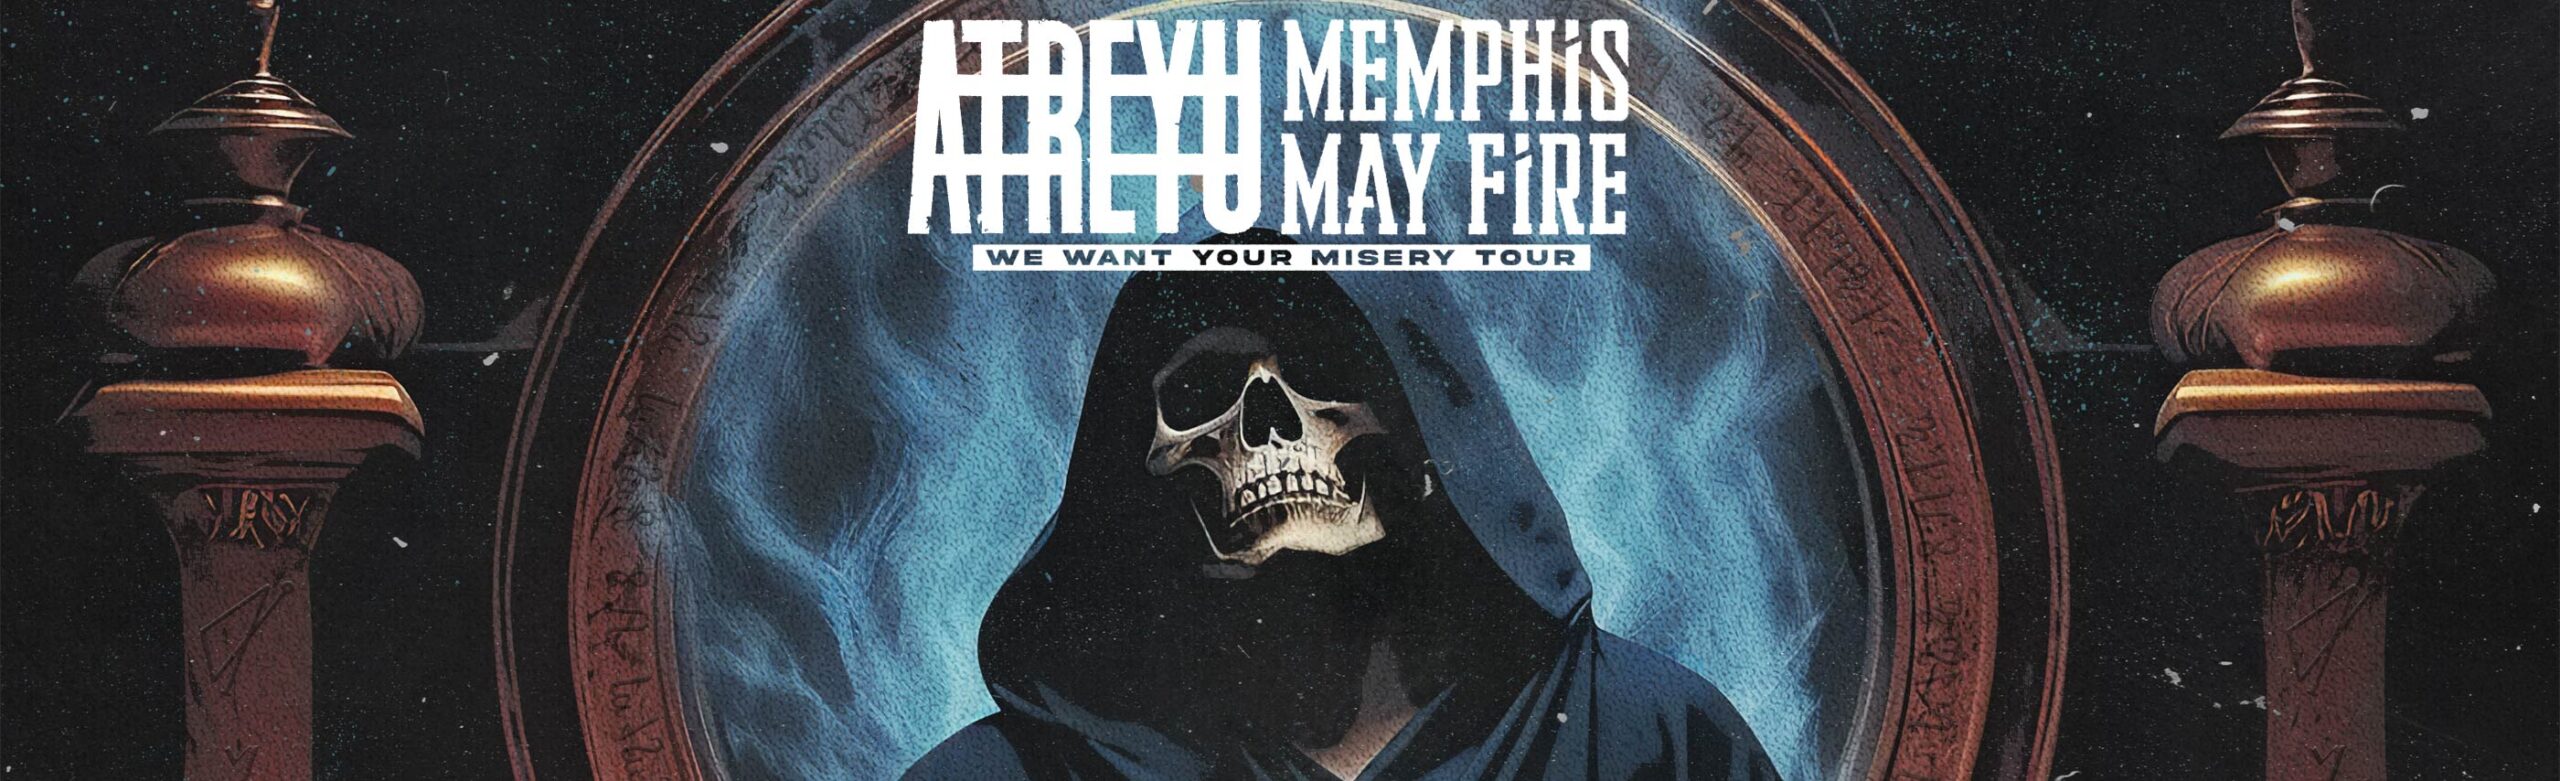 Atreyu and Memphis May Fire Announce Concert at The ELM with Catch Your Breath Image